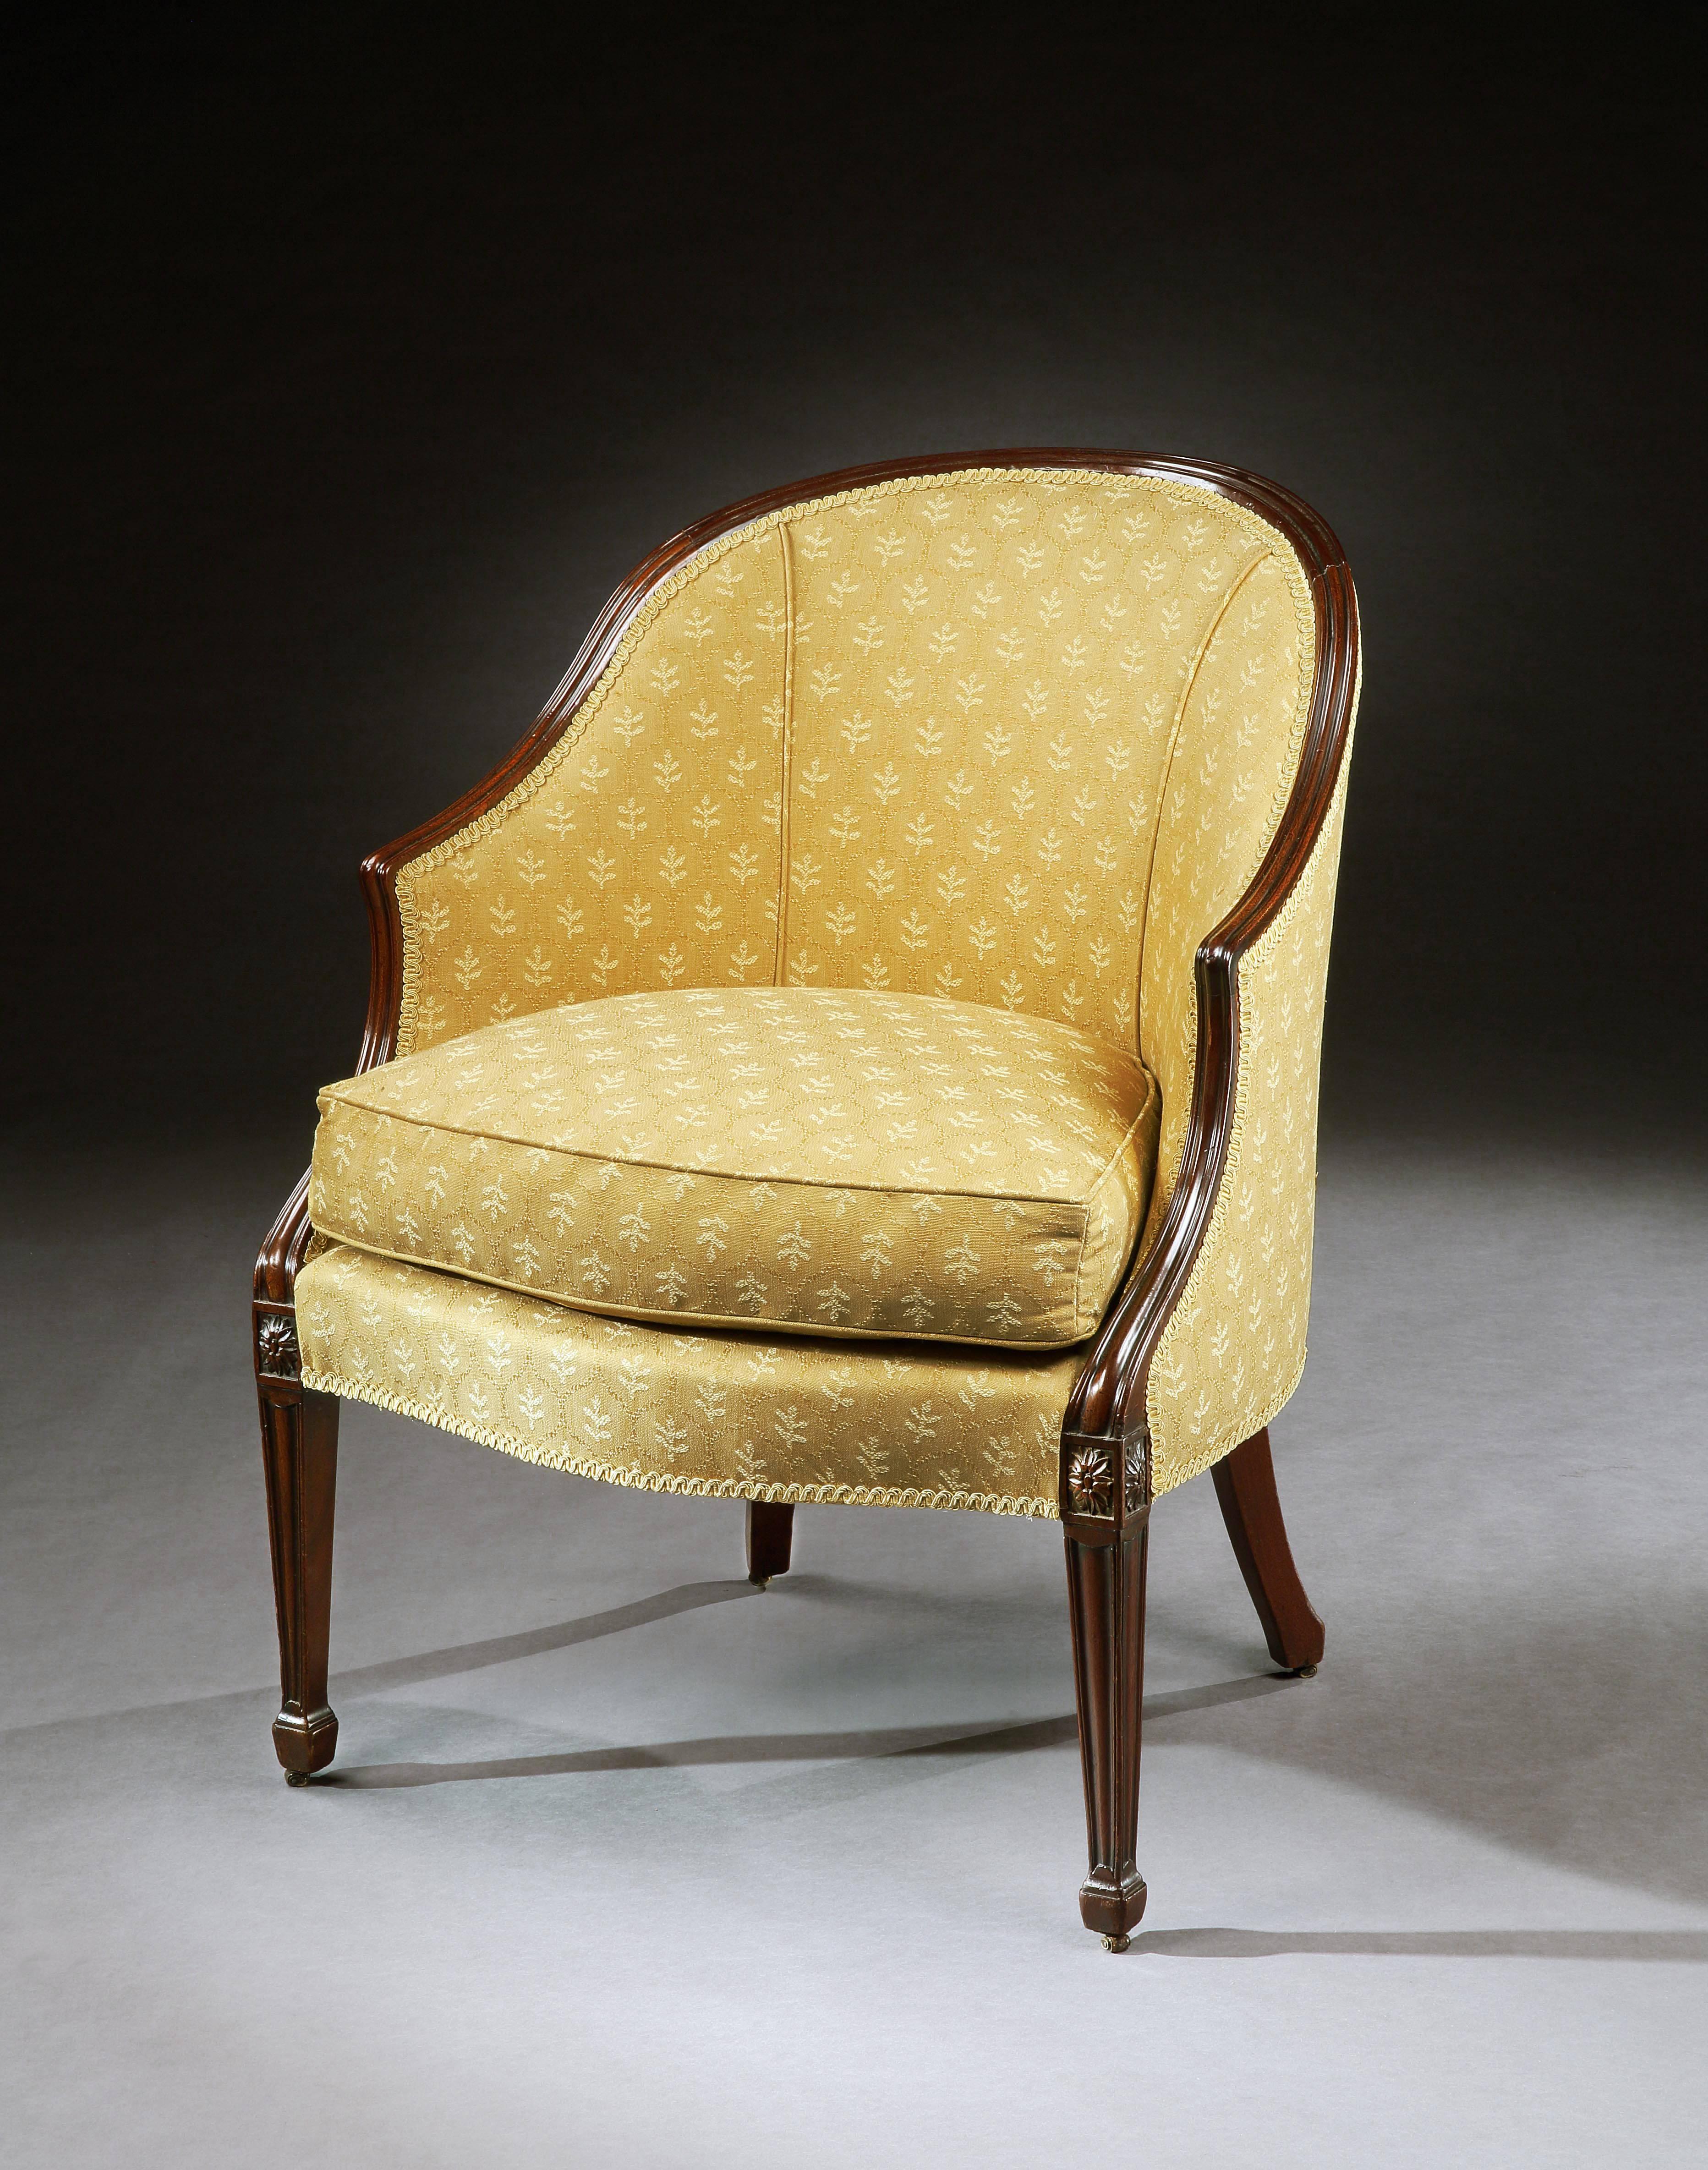 A George III mahogany Bergere chair, the moulded seat frame above splayed rear legs and fluted front legs headed with patara, terminating in its original castors.